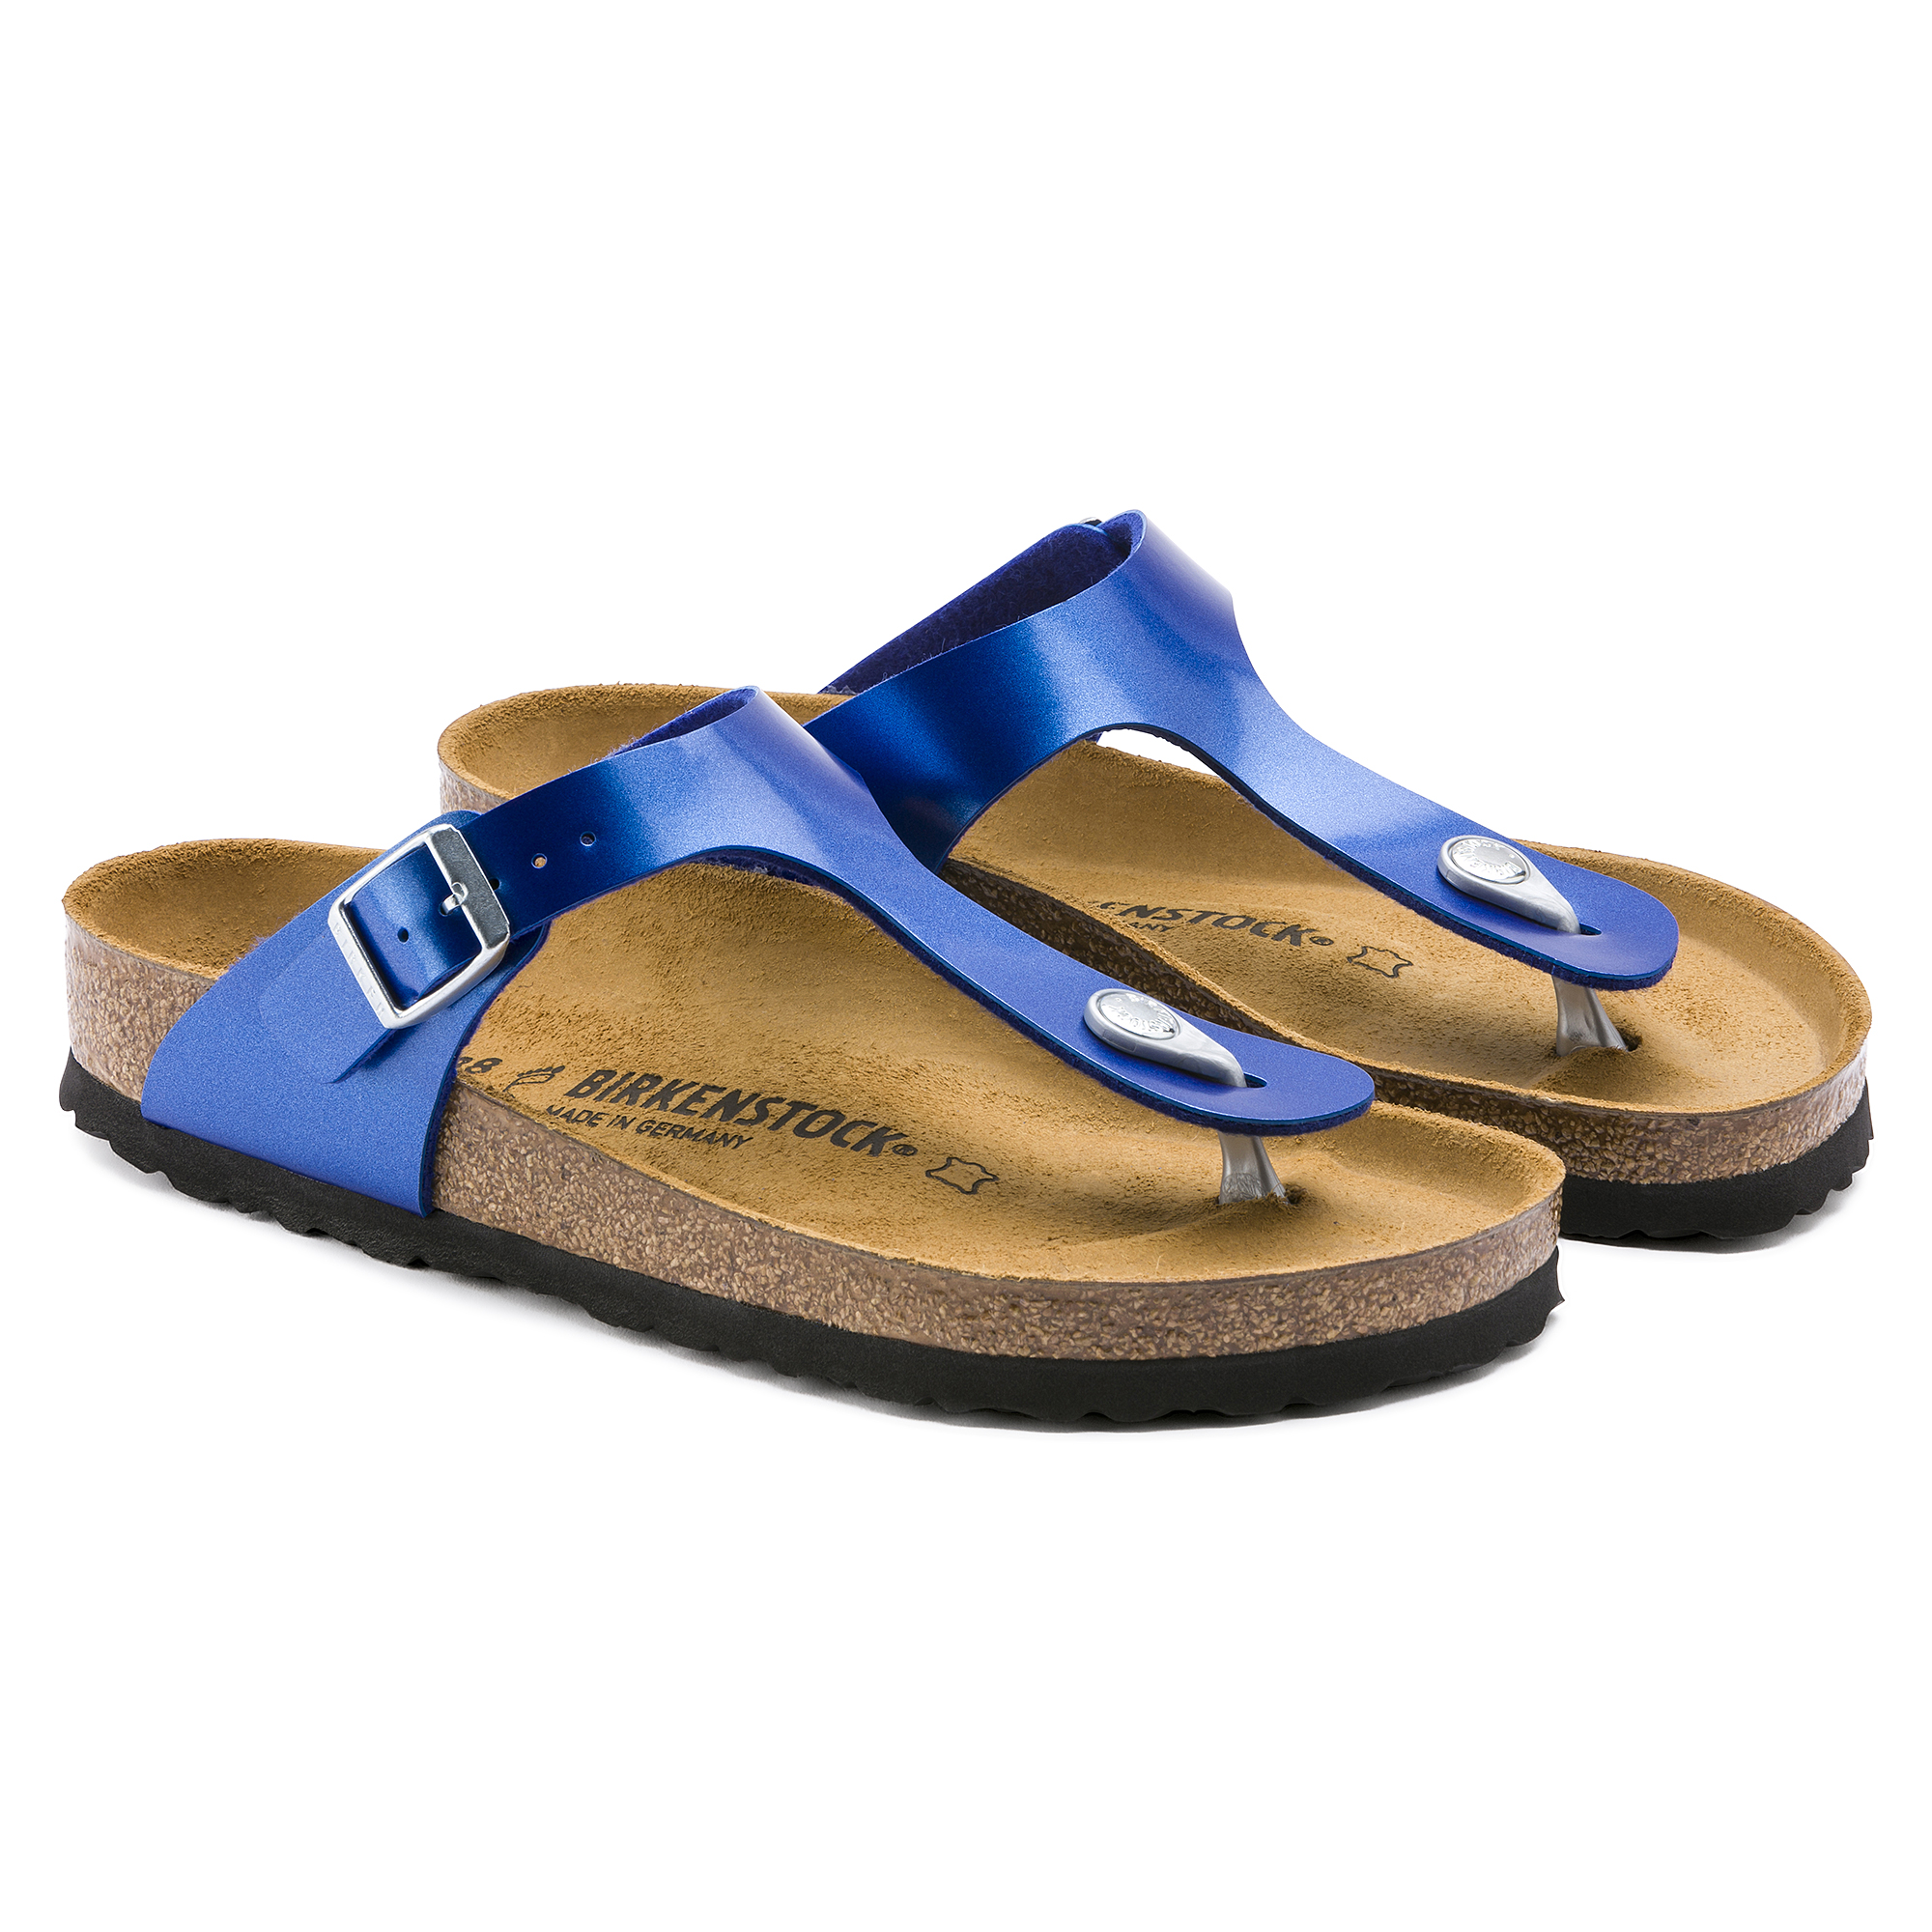 sreeleathers sandals online shopping